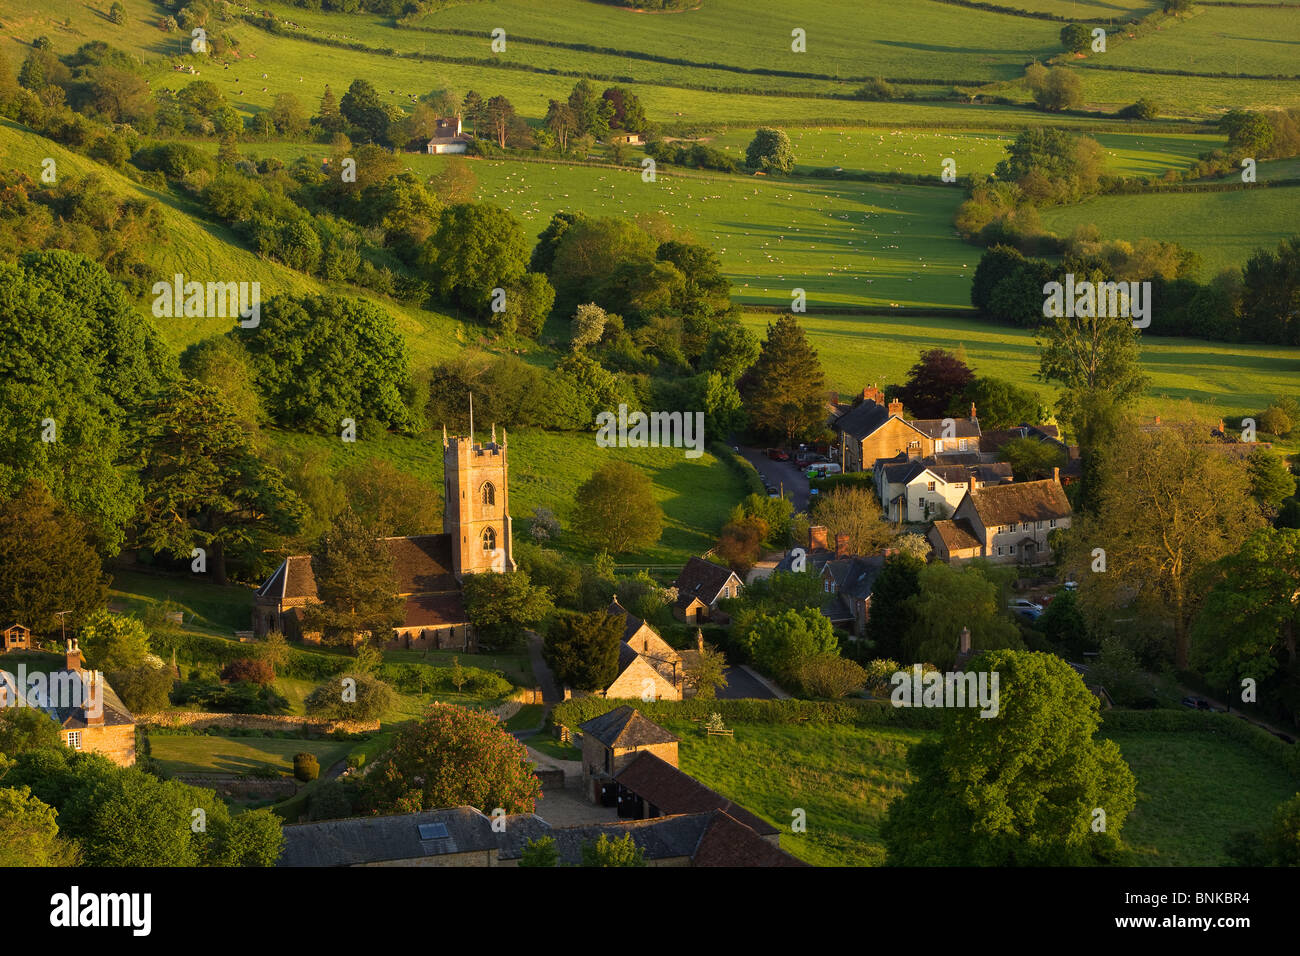 A lovely evening in early summer, looking down on the village of Corton Denham, Somerset, UK on the Dorset-Somerset border Stock Photo